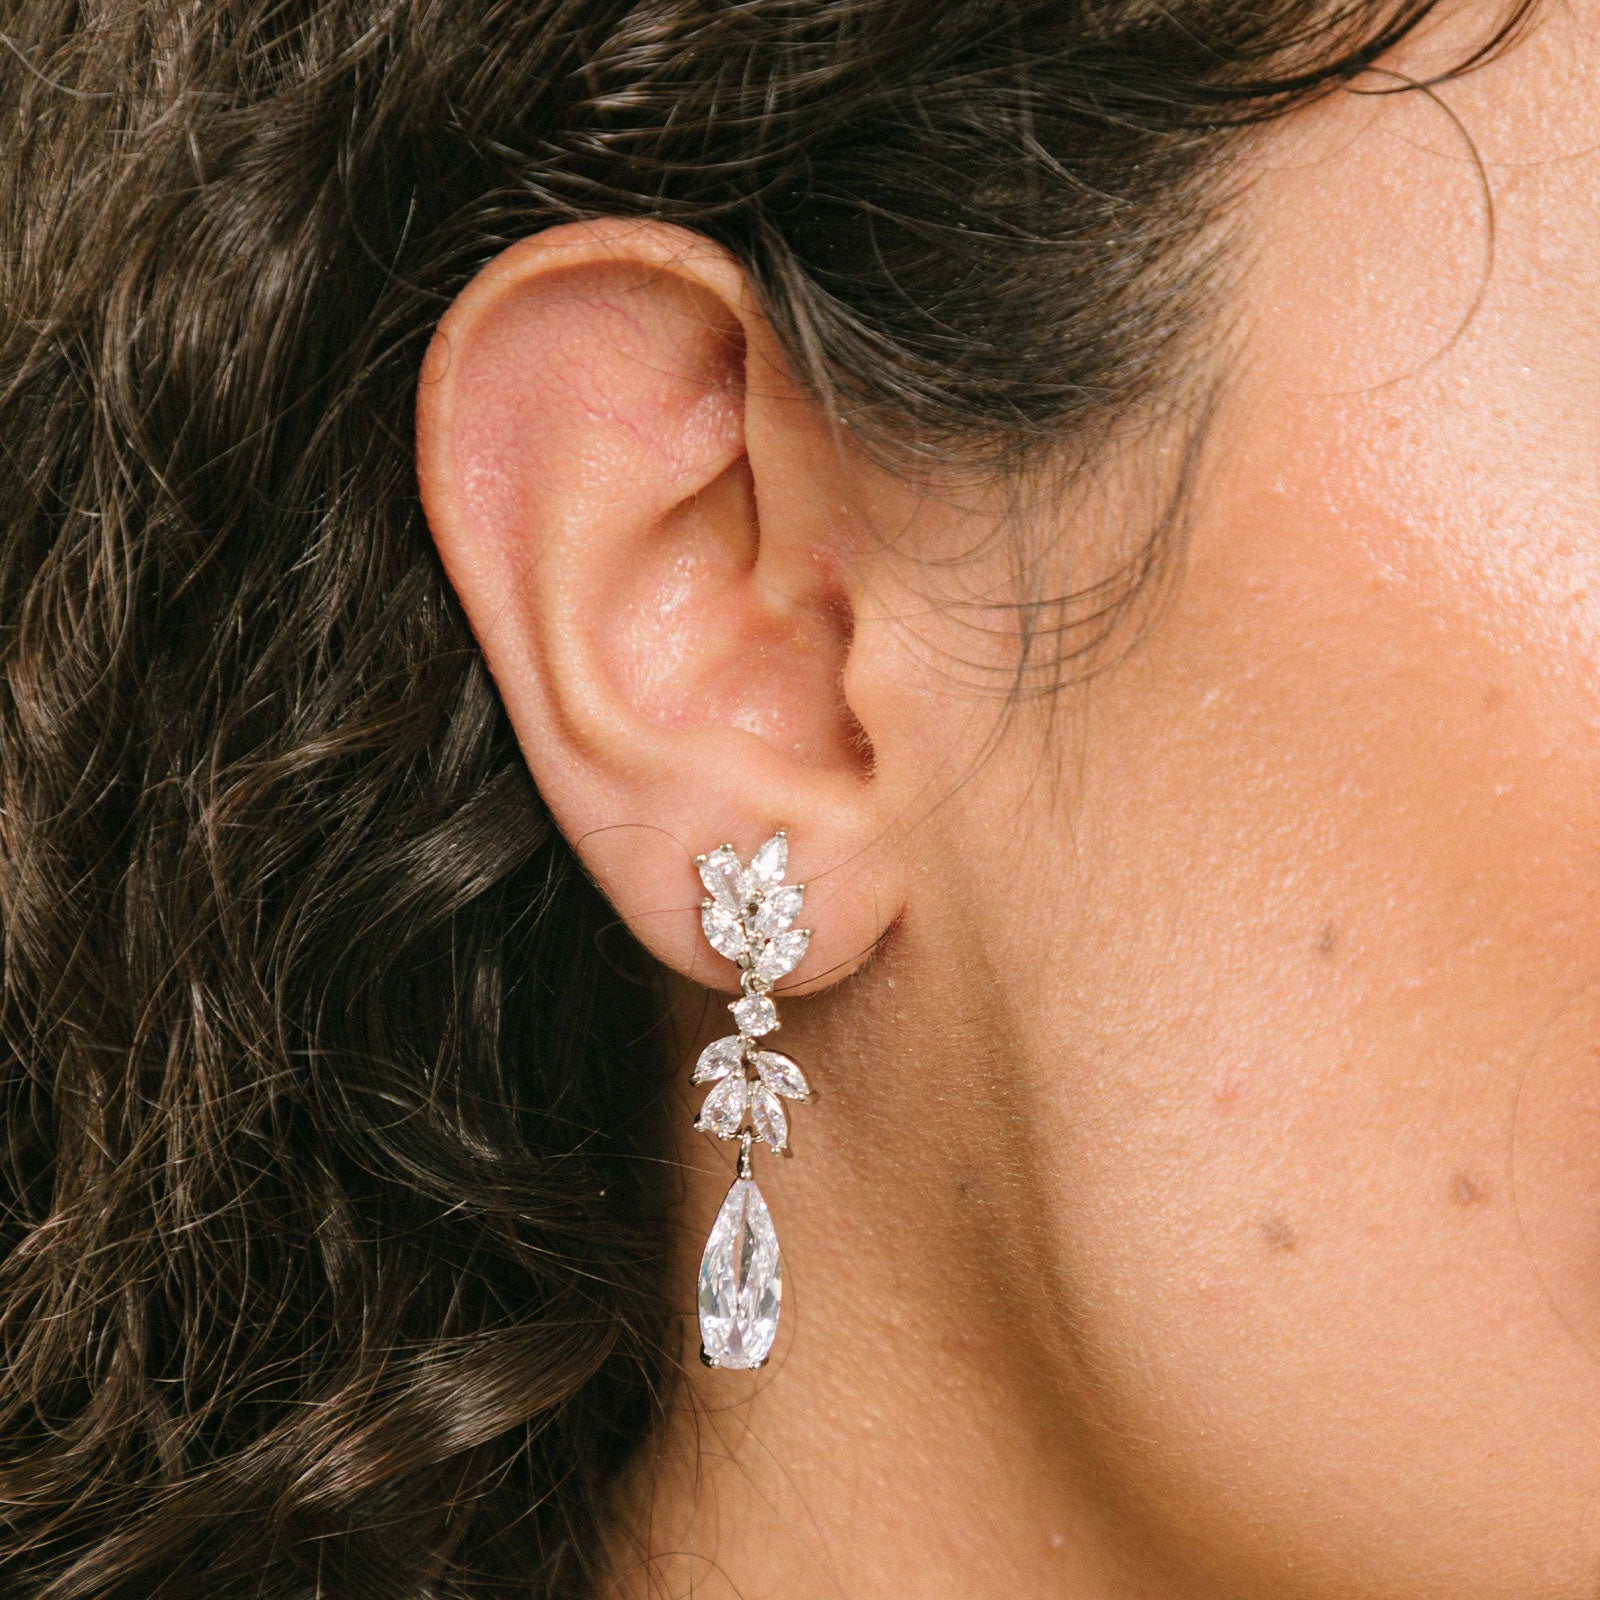 A model wearing the Lobelia Clip-On Earrings feature a secure, comfortable hold that lasts for 8-12 hours. Attached to silver-plated metal alloy, these earrings are fitted with foam padding for optimal comfort and ease-of-use. Ideal for all ear types, from thin/small to thick/large, along with sensitive ears and those in the healing/stretching process. Cubic Zirconia adds a hint of sparkle. Please note, item includes one pair of earrings.